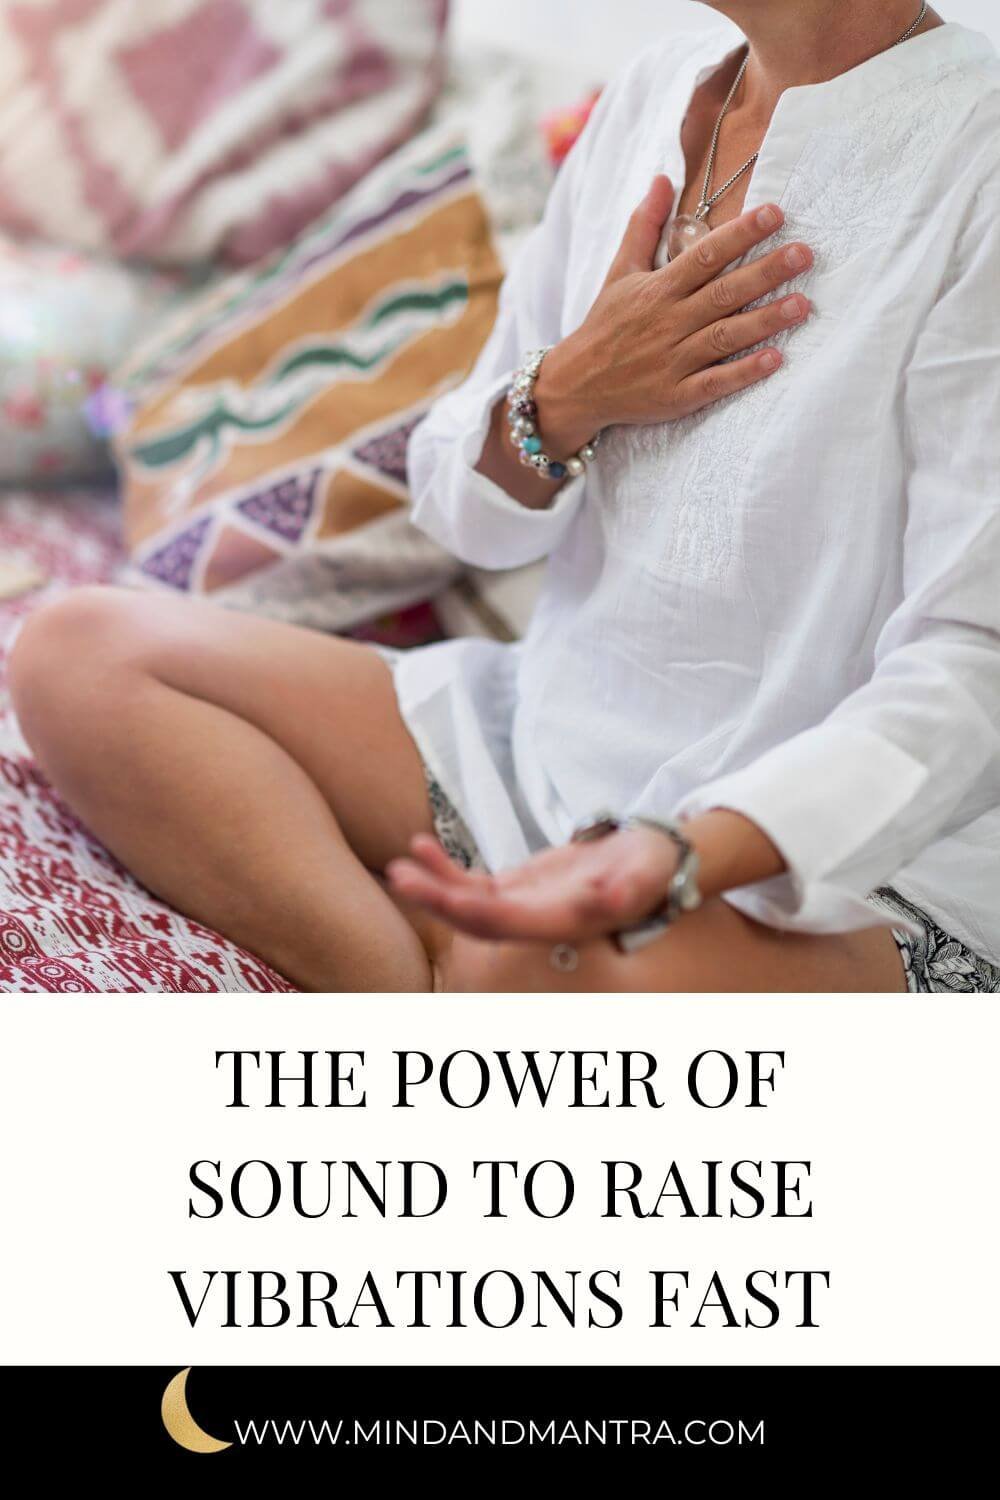 The Power of Sound to Raise Vibrations Fast (3).jpg